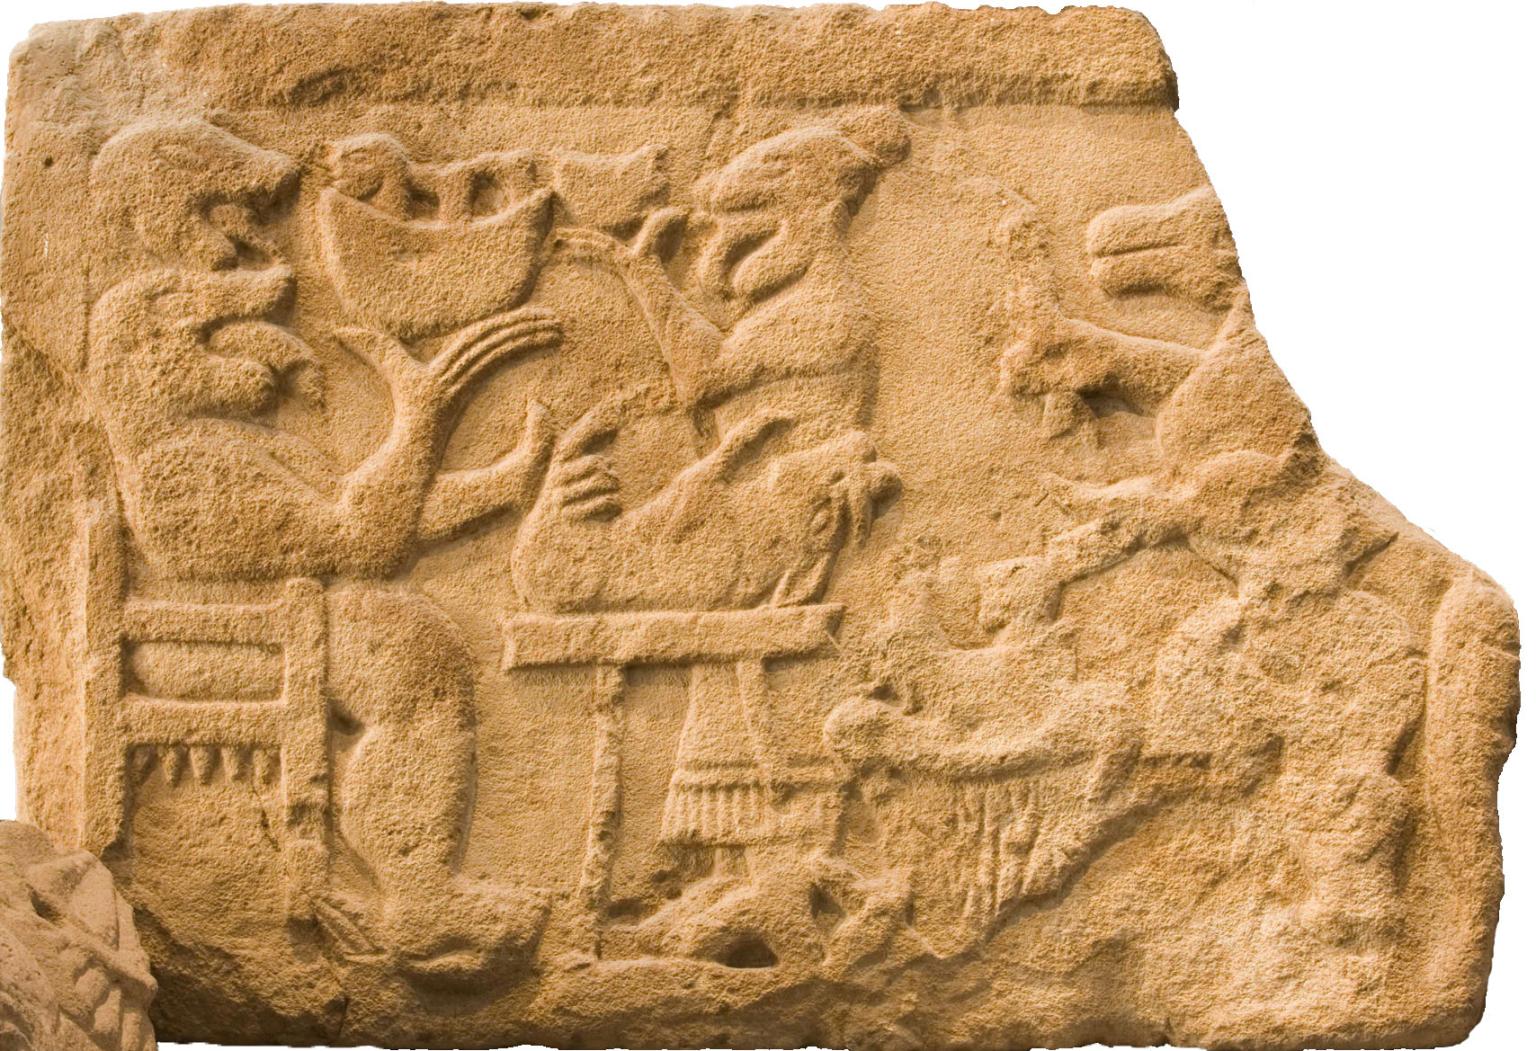 Stone relief of human-like monster in a chair and several animals and figures.